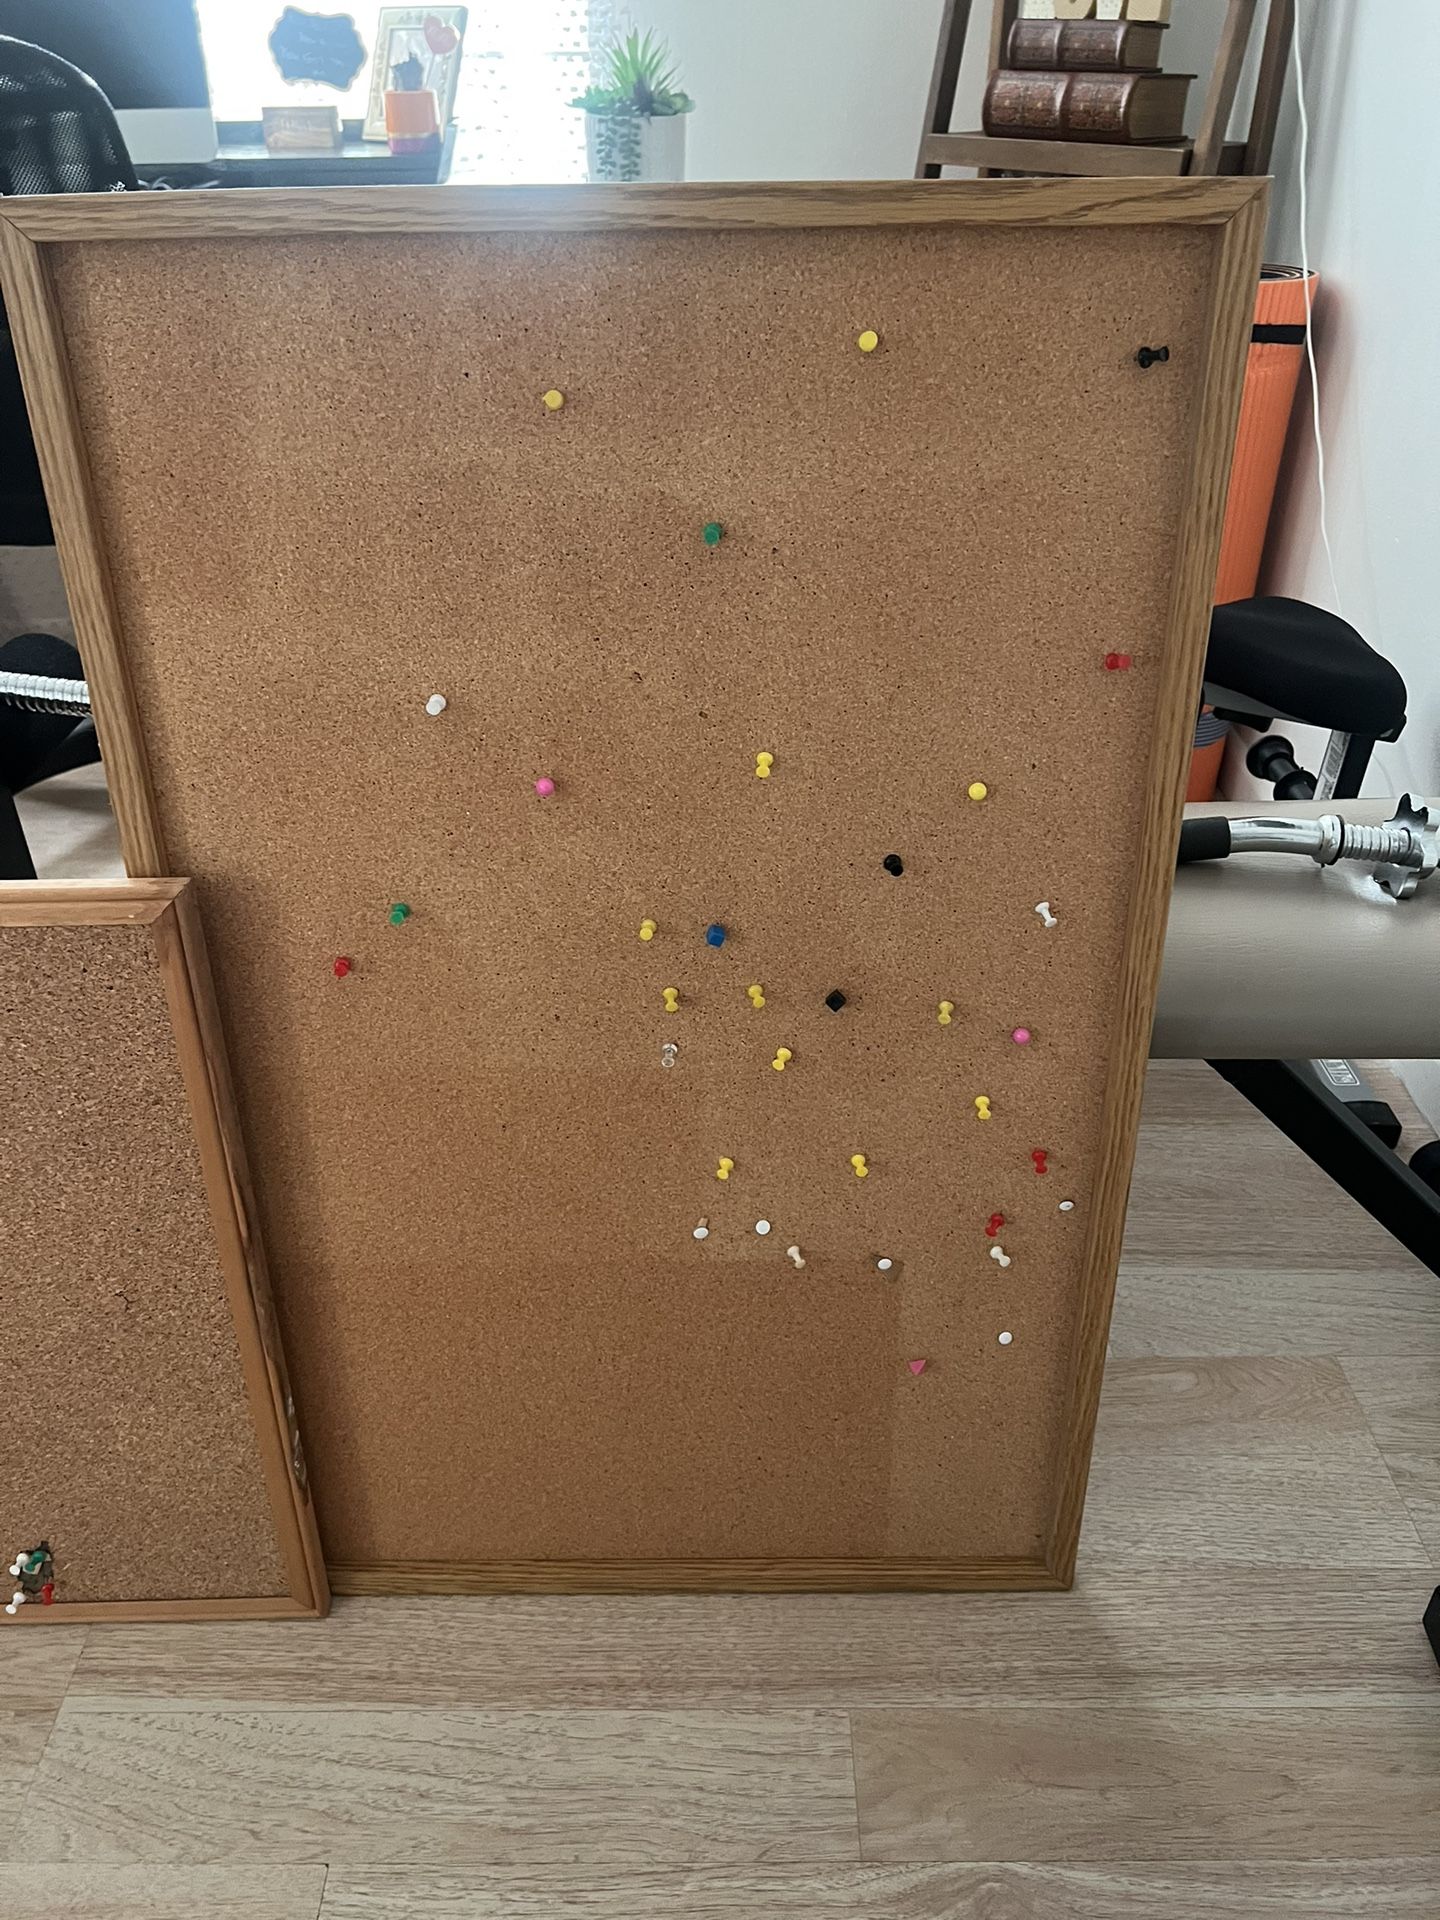 CORK BOARDS 2 For. $45